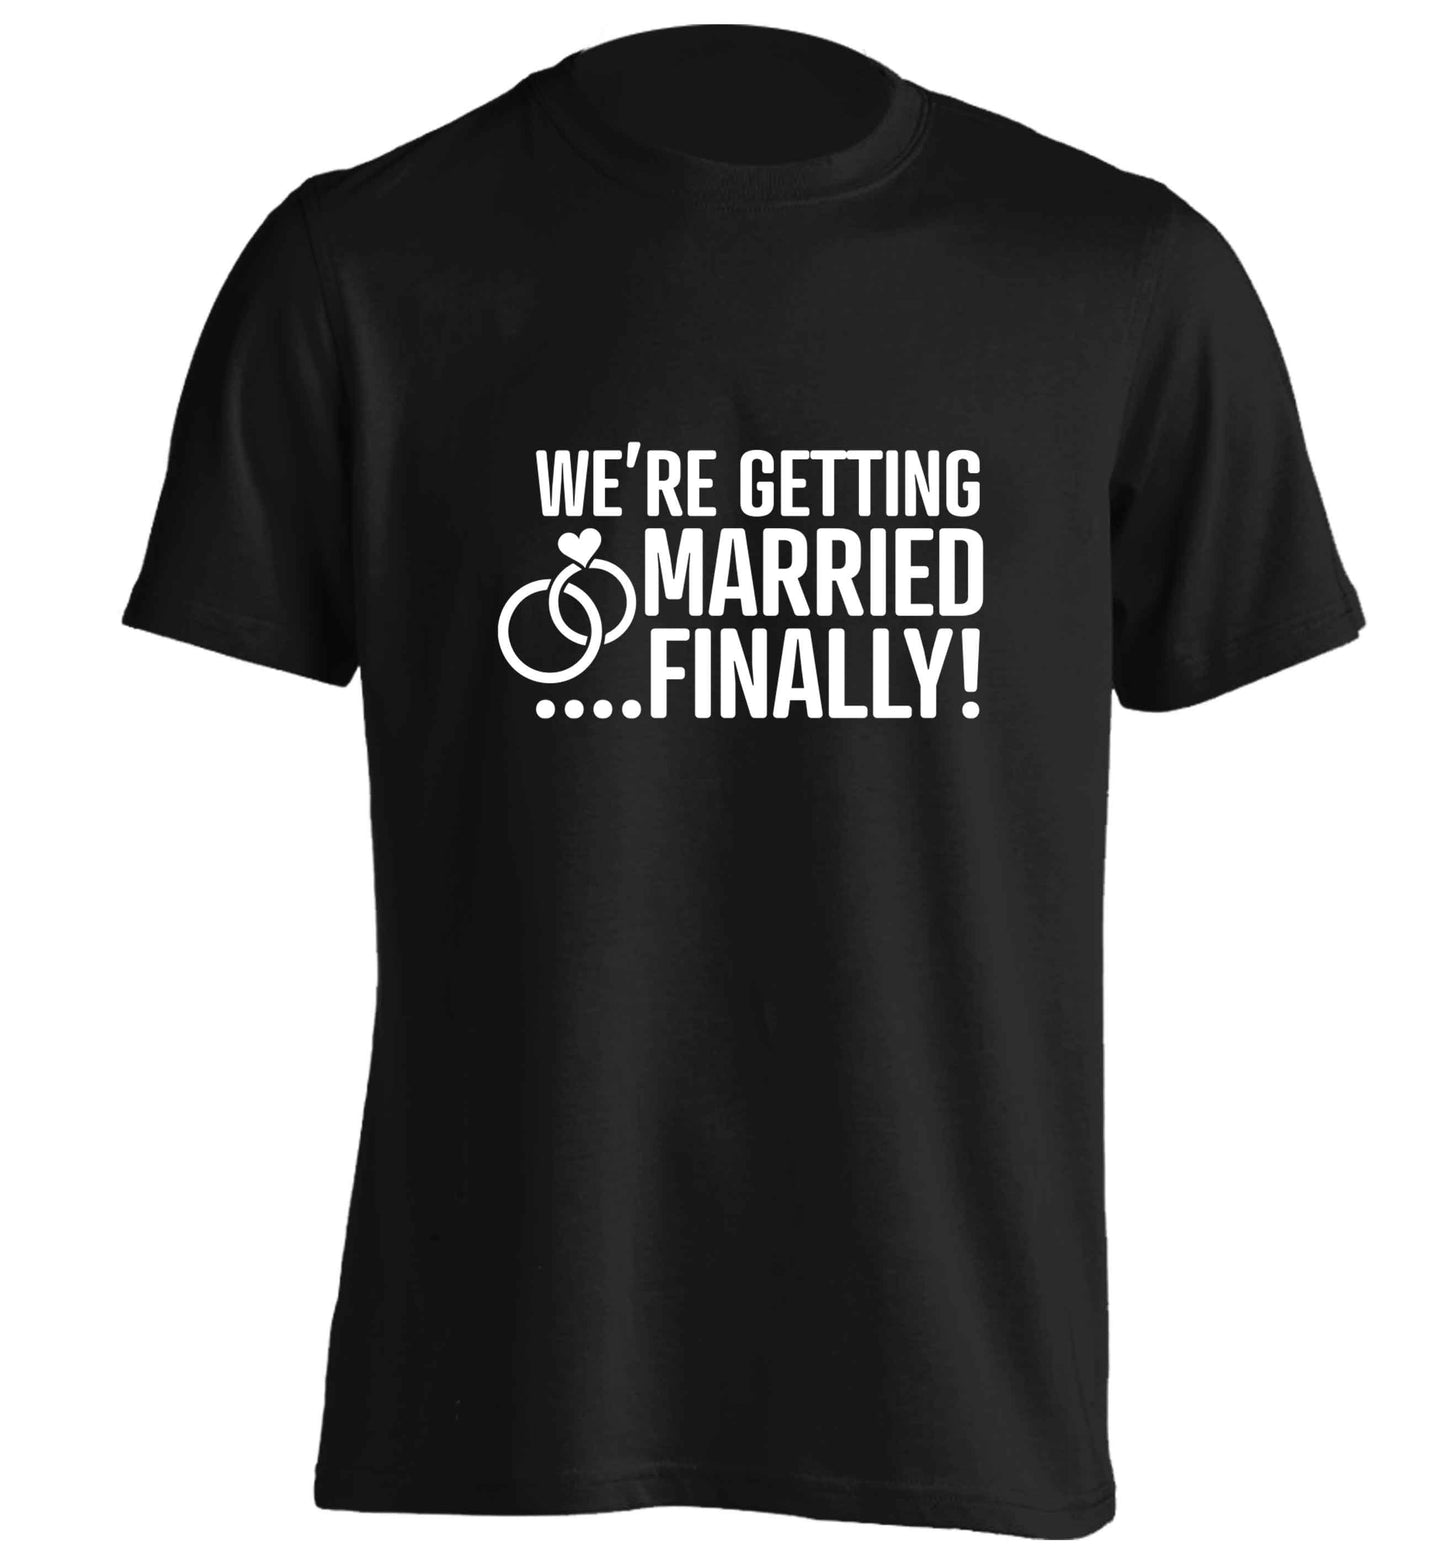 It's been a long wait but it's finally happening! Let everyone know you're celebrating your big day soon! adults unisex black Tshirt 2XL